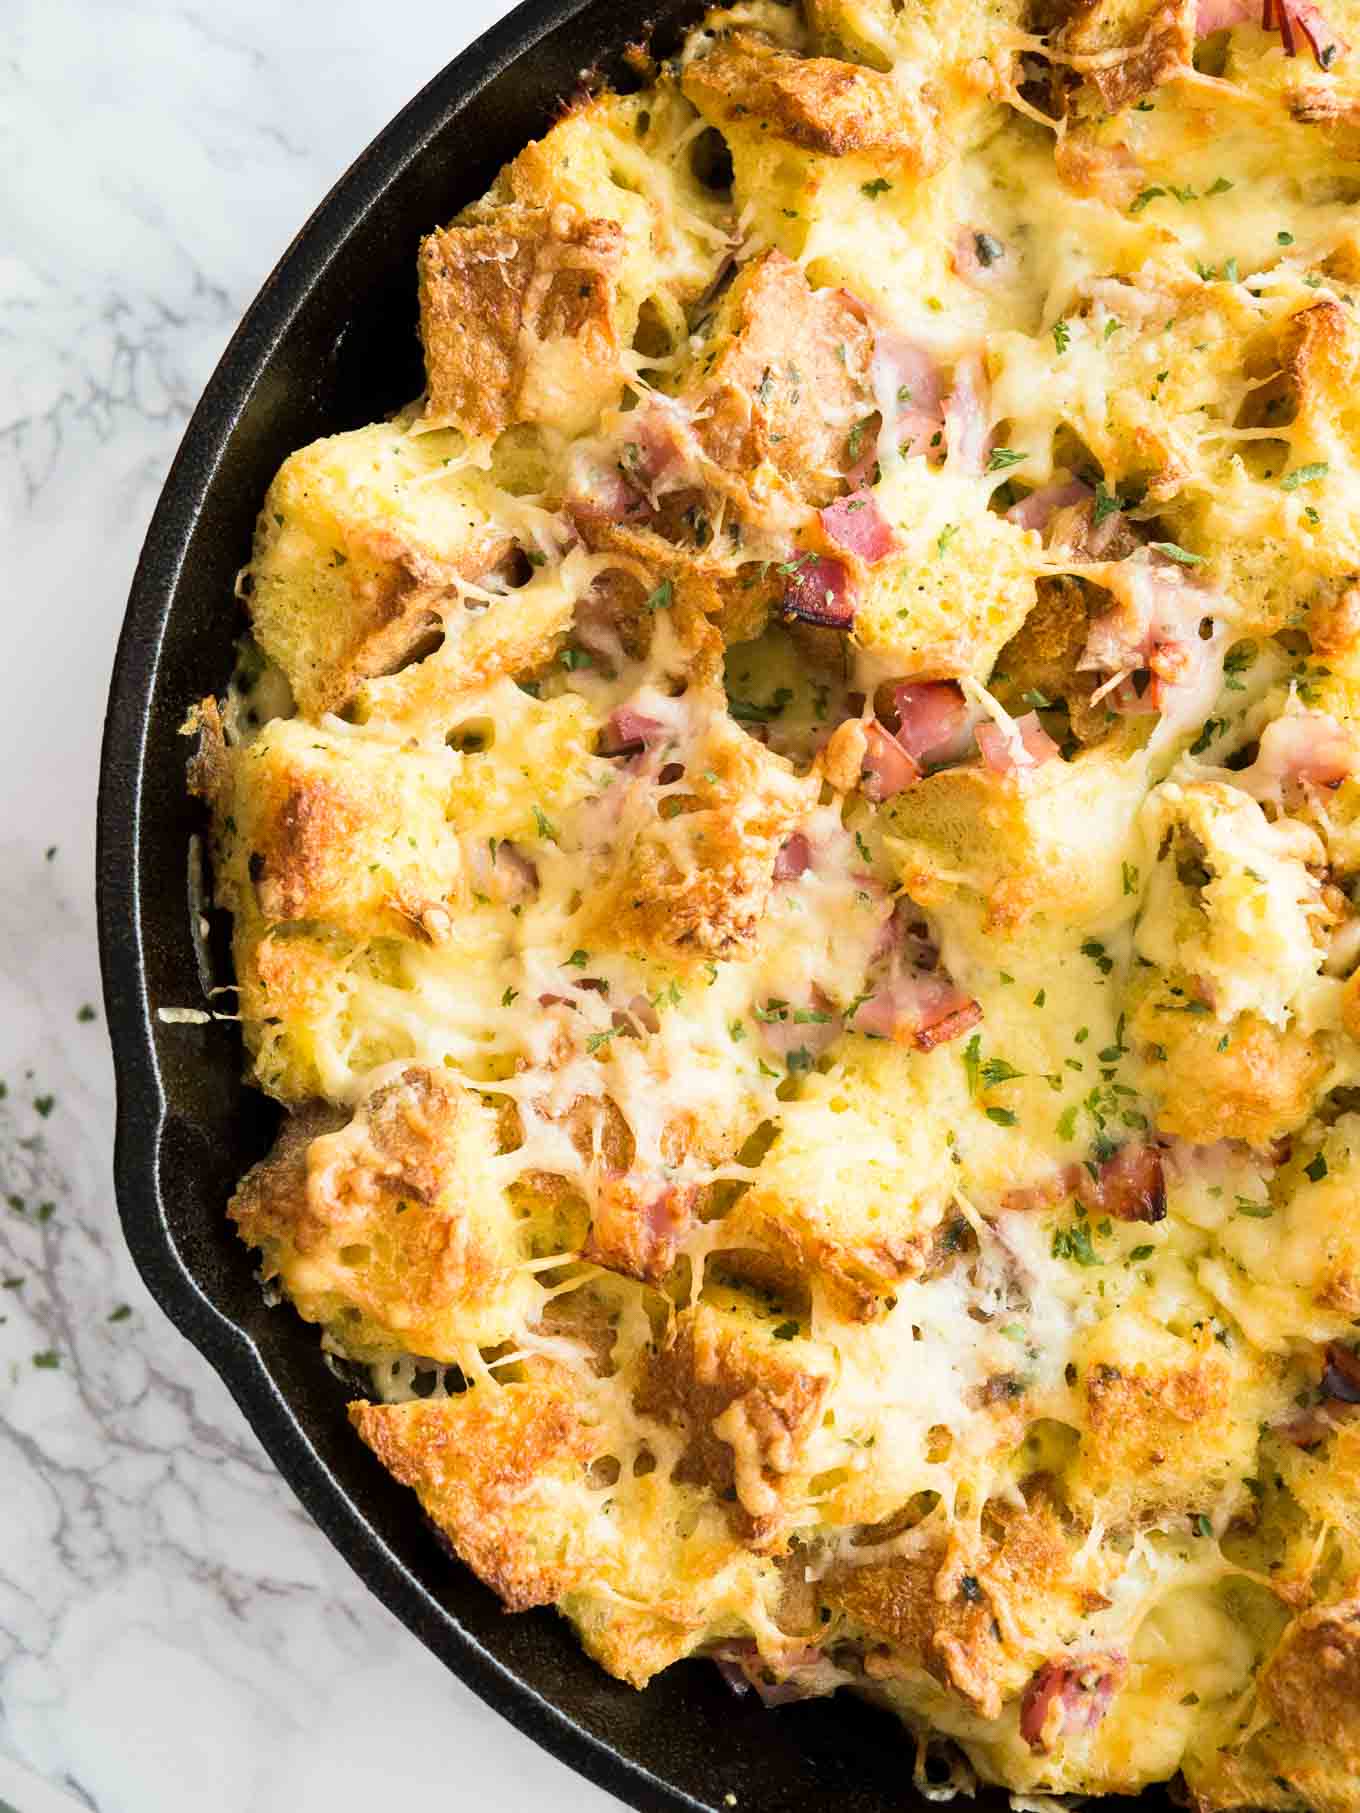 This Ham and Cheese Breakfast Casserole is the perfect dish to use leftovers! A delicious breakfast bake or strata made with bread, cheese, and ham that will become your family's favorite.